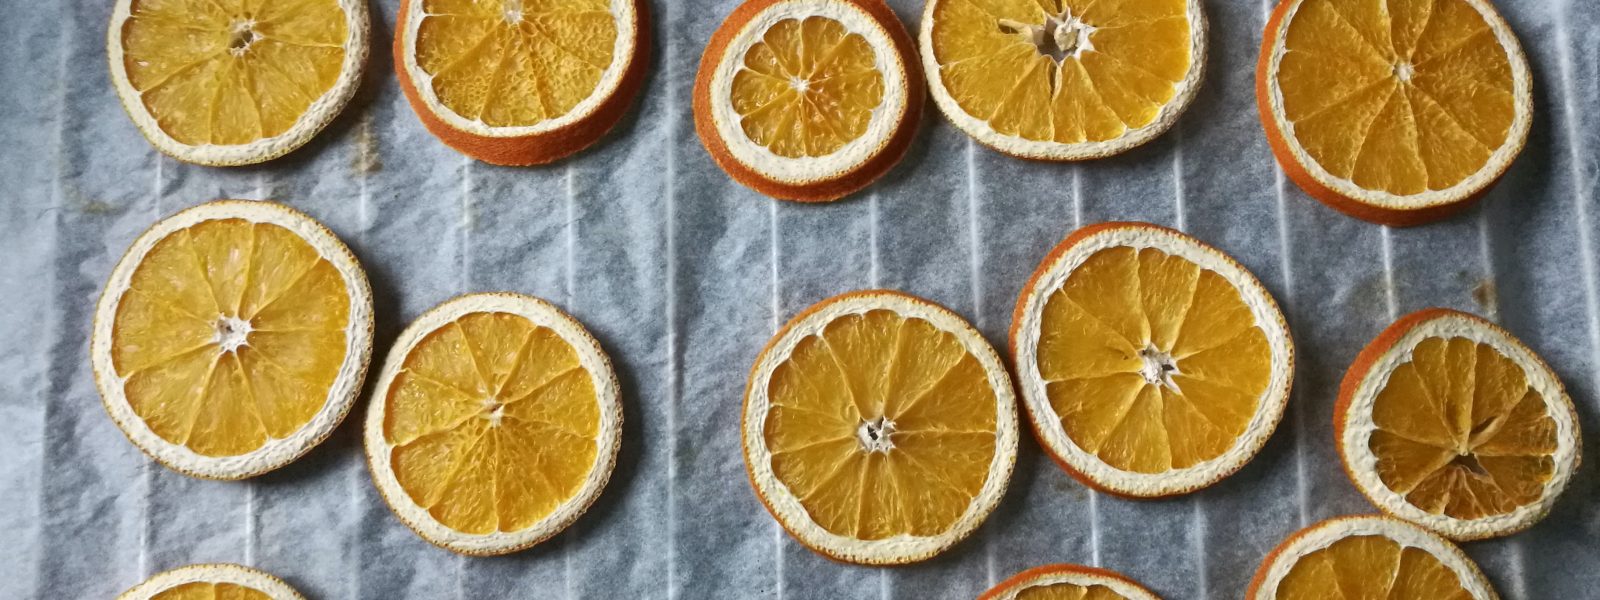 dried orange slices on white parchment paper